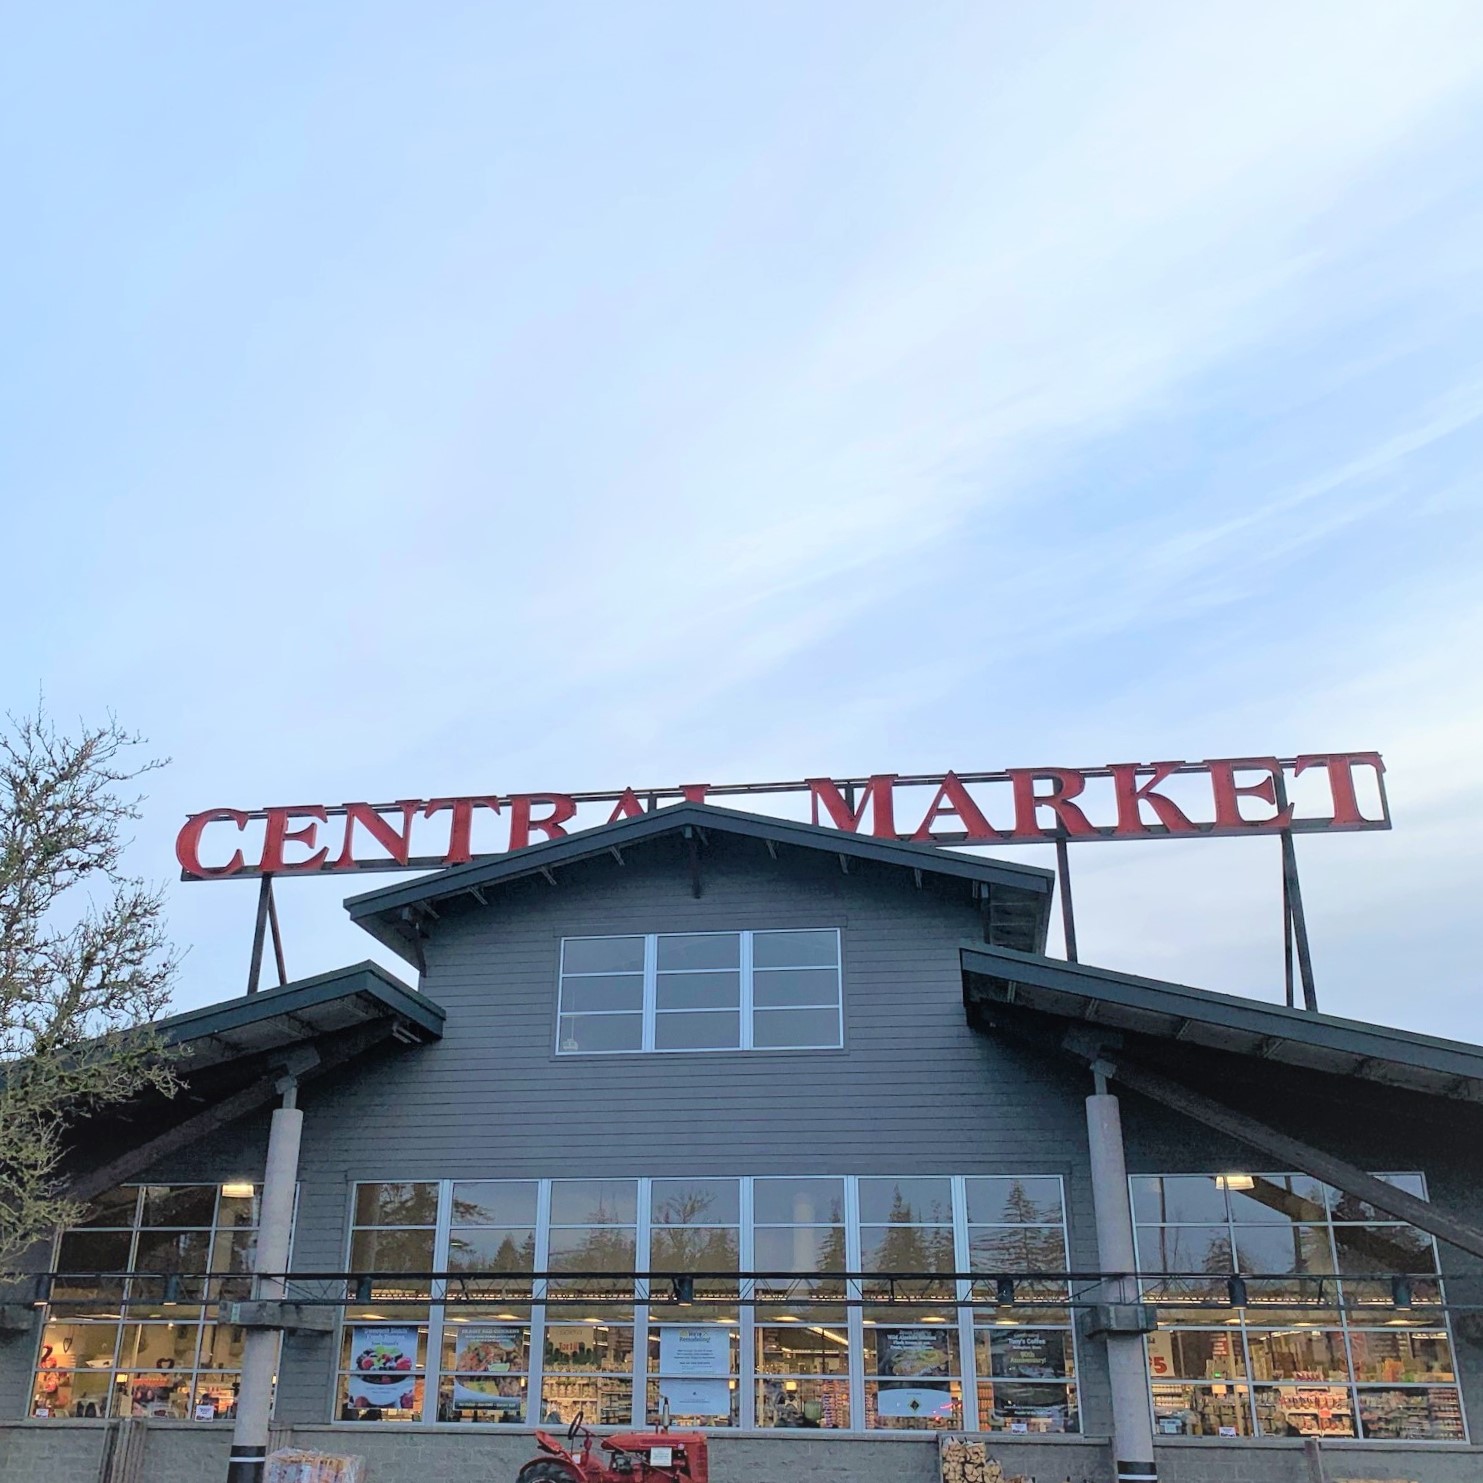 An image of the front of Central Market in Mill Creek, WA